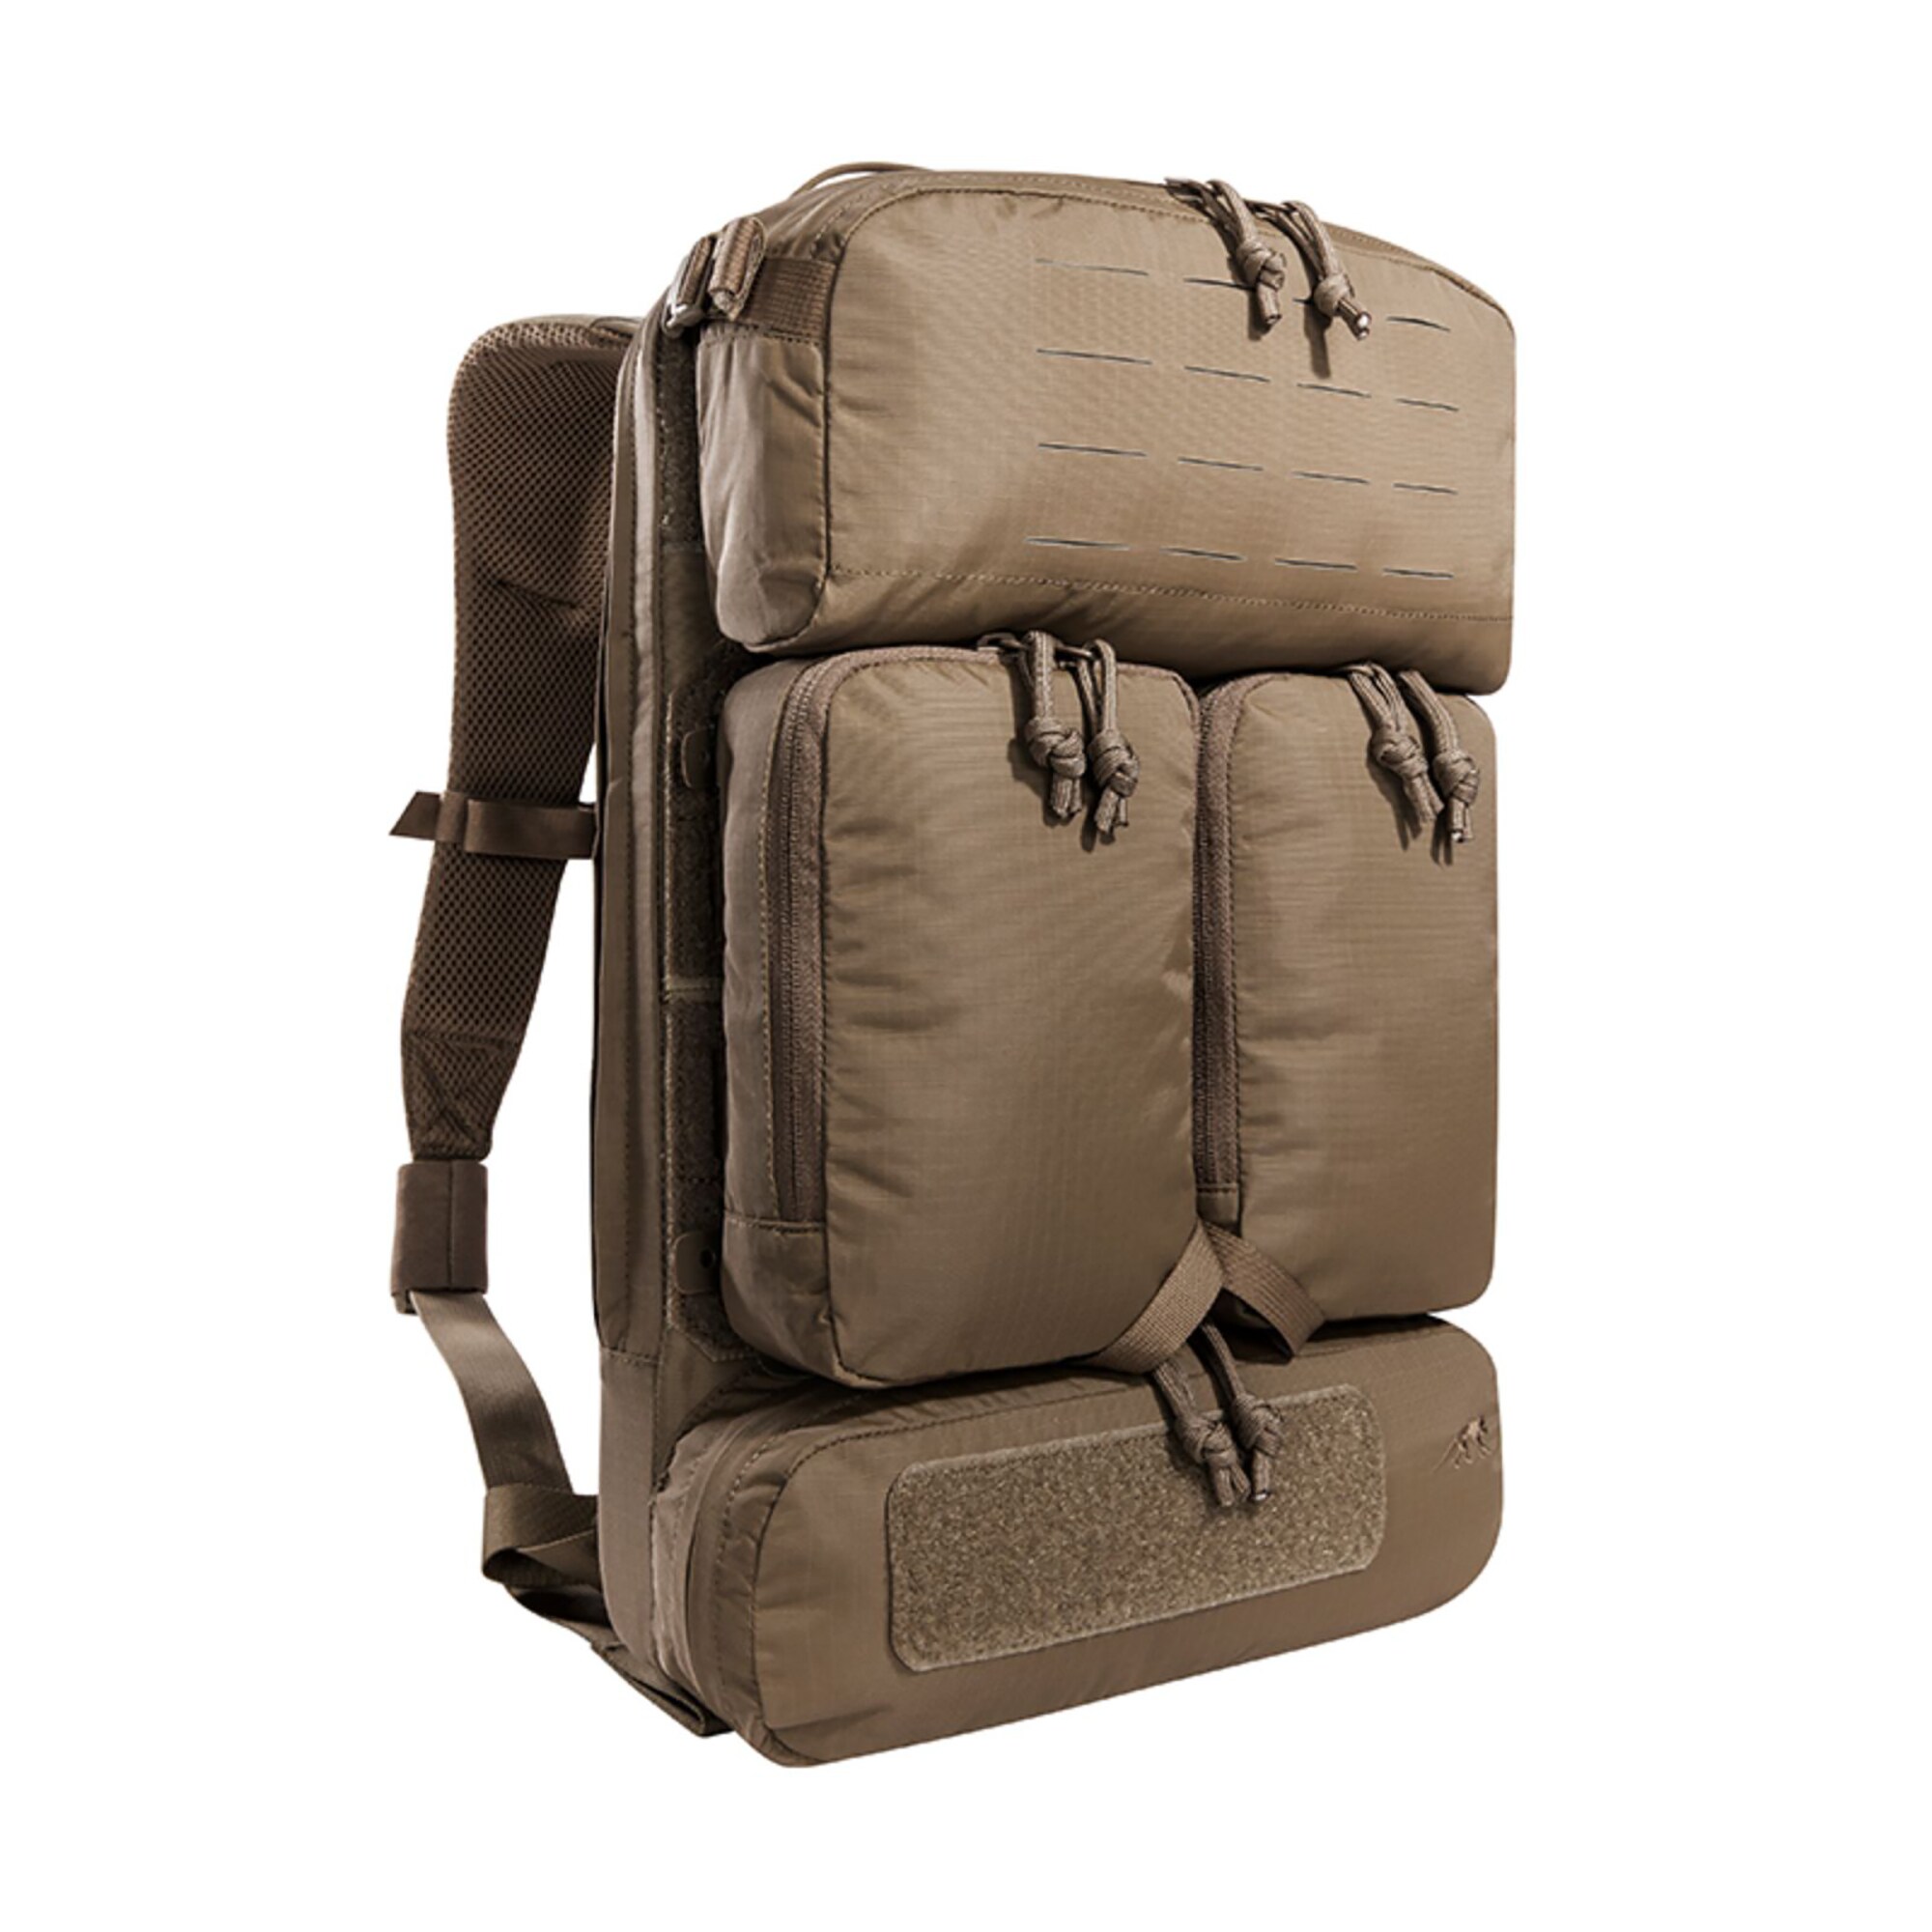 Tasmanian Tiger Modular Military Style Backpack - Lightweight and